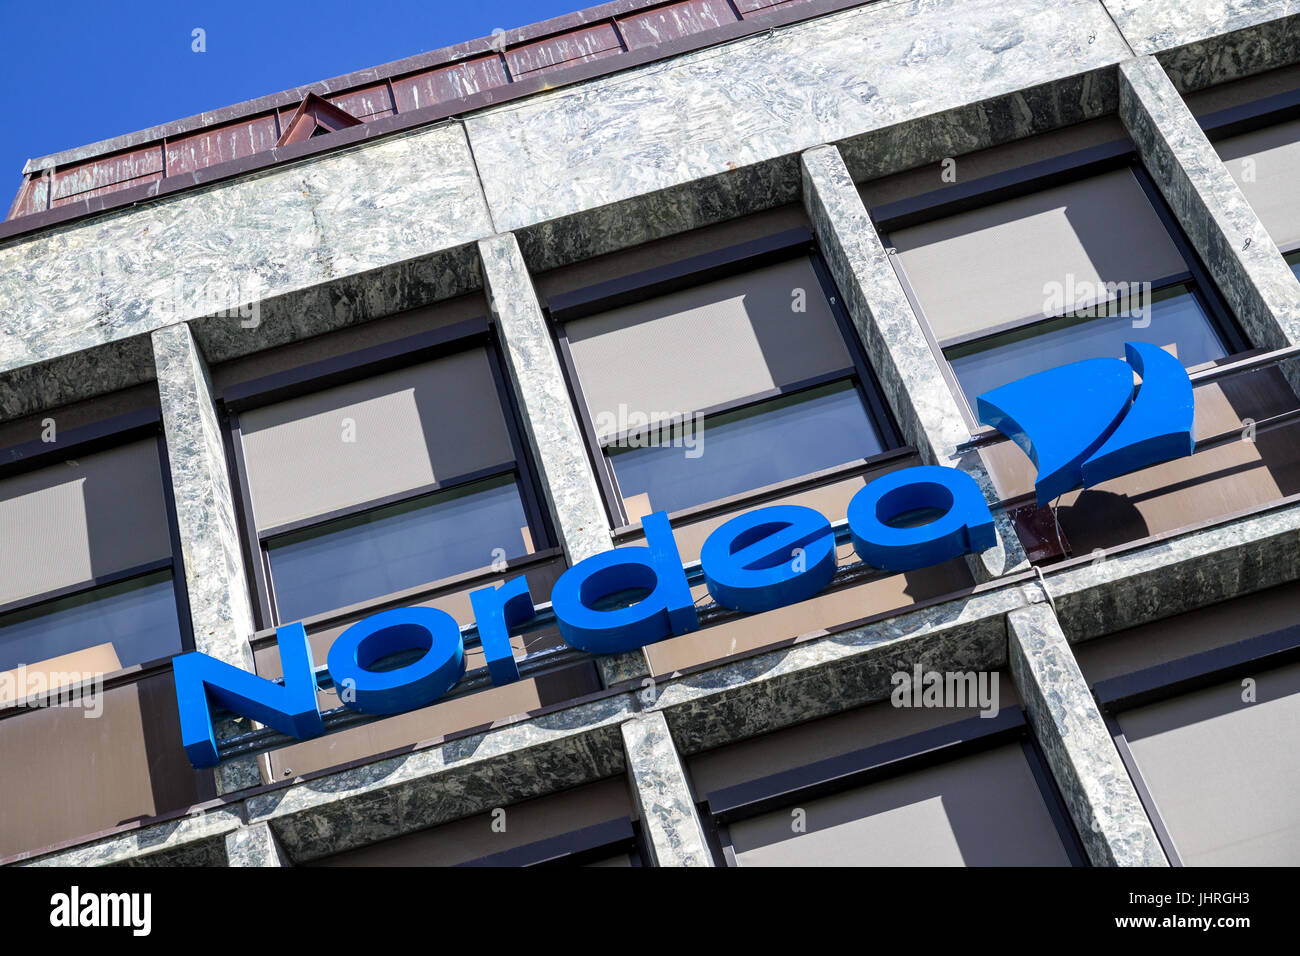 Nordea sign at branch. Nordea Bank AB is a Nordic financial services group operating in Northern Europe. Stock Photo